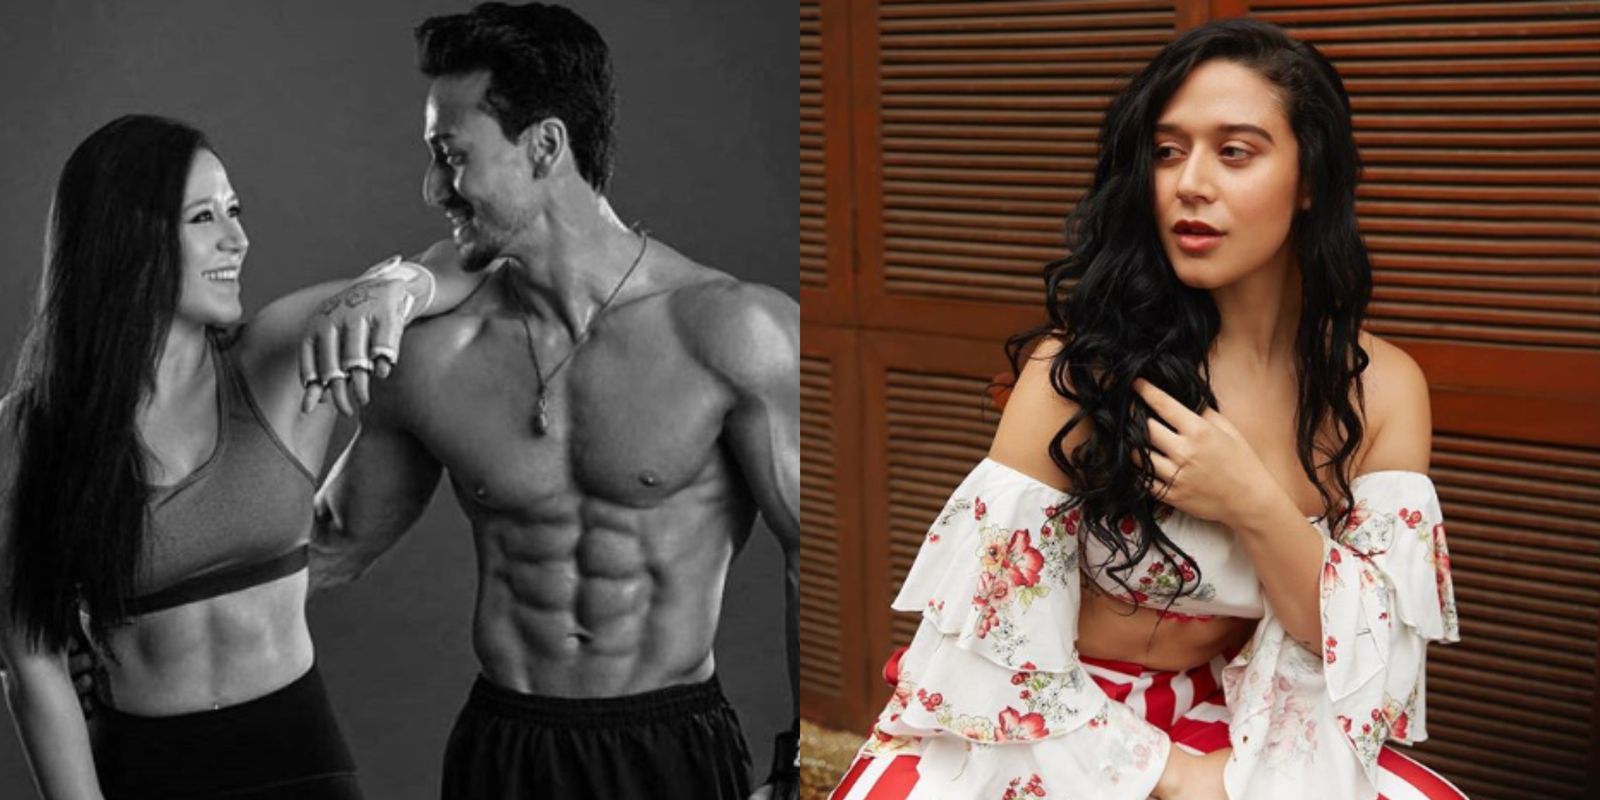 Tiger Shroff Wishes Sister Krishna Shroff A Happy Birthday; Says “Don’t Get Married Until You’re 80”